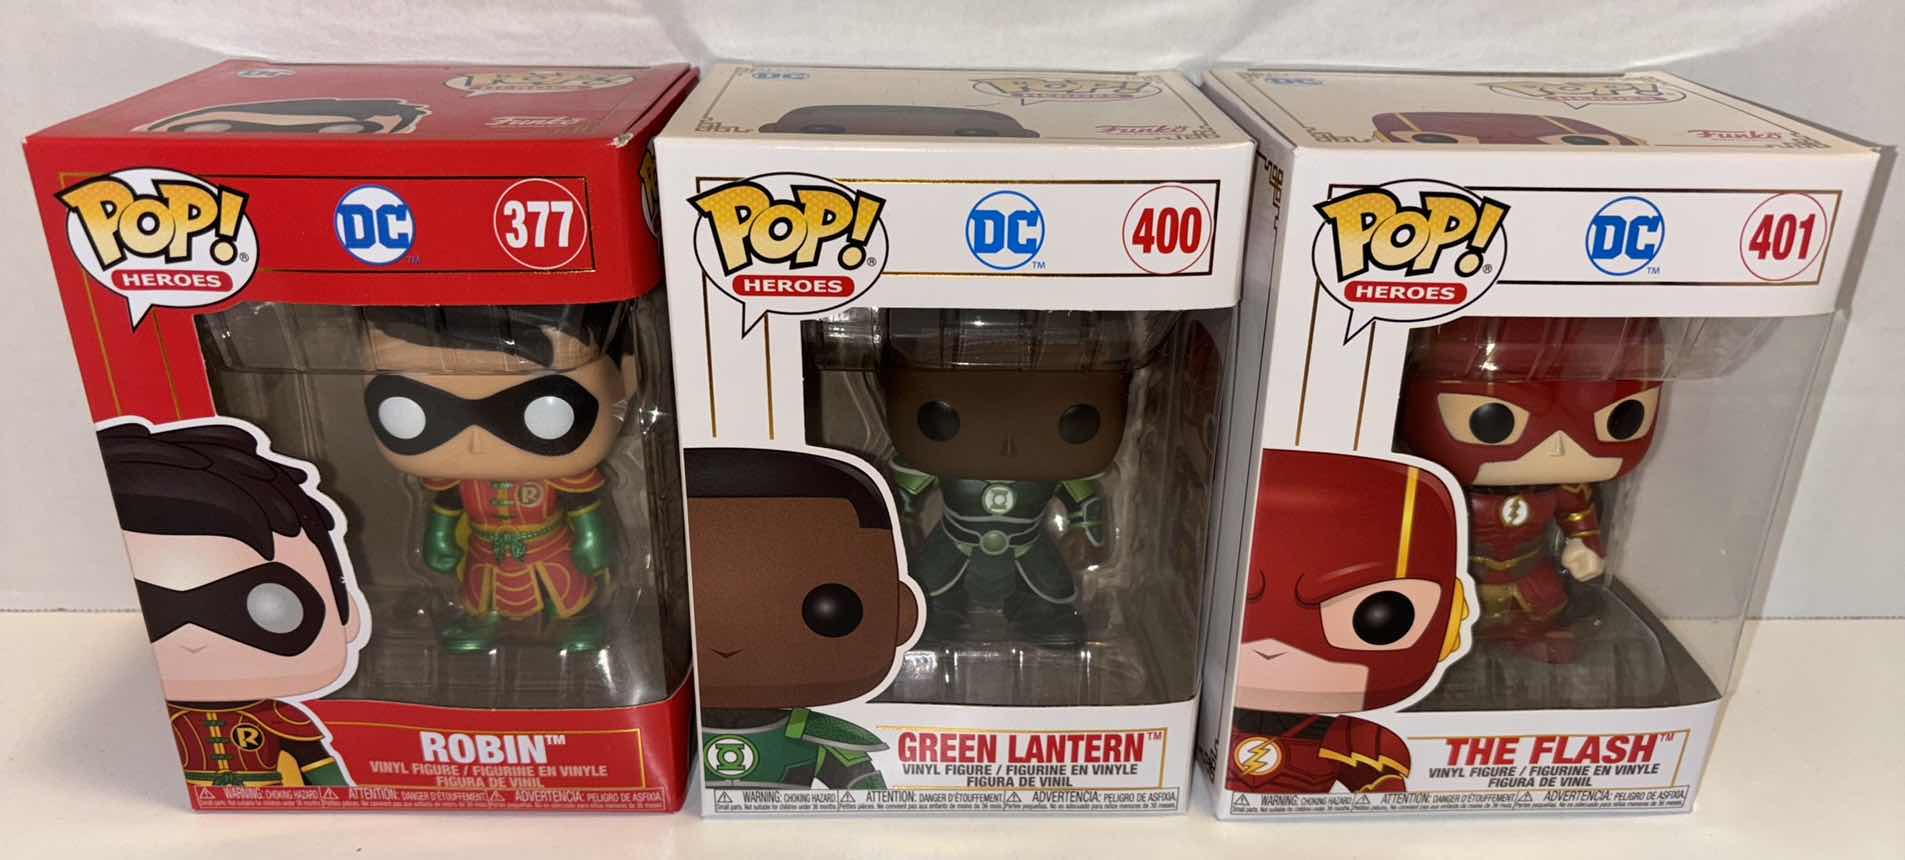 Photo 1 of NEW FUNKO POP! HEROES DC IMPERIAL PALACE VINYL FIGURE 3-PACK, #377 ROBIN, #400 GREEN LANTERN & #401 THE FLASH